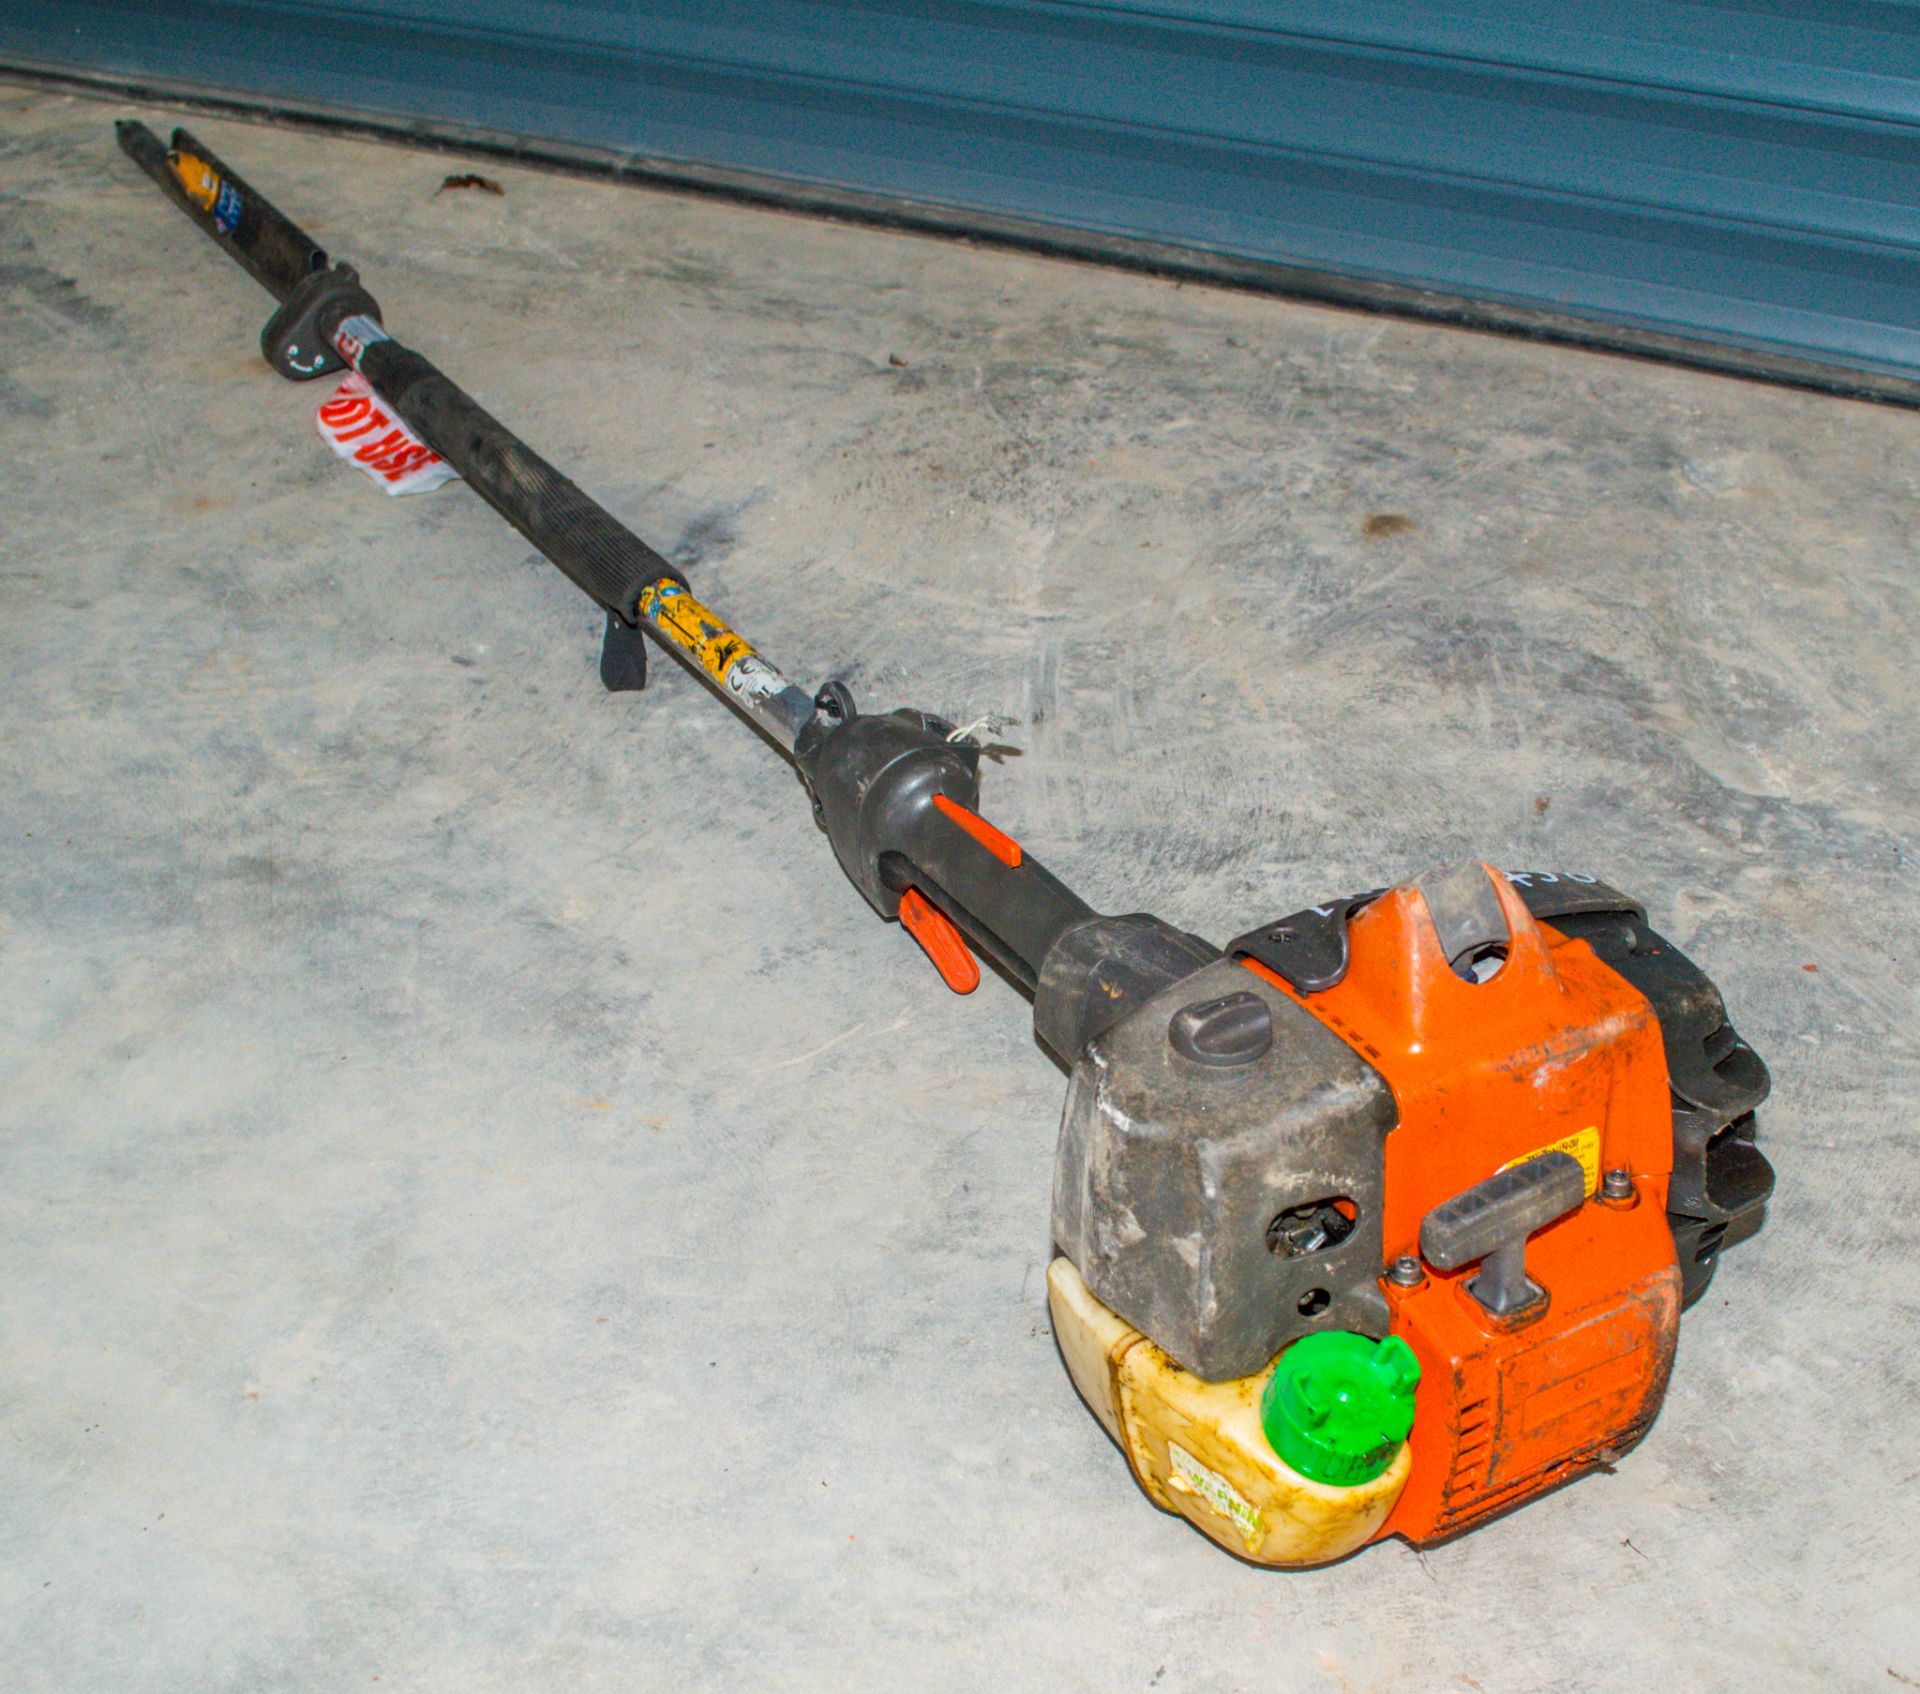 Husqvarna 327HE4 petrol driven strimmer 16031239 ** No head or power switch **